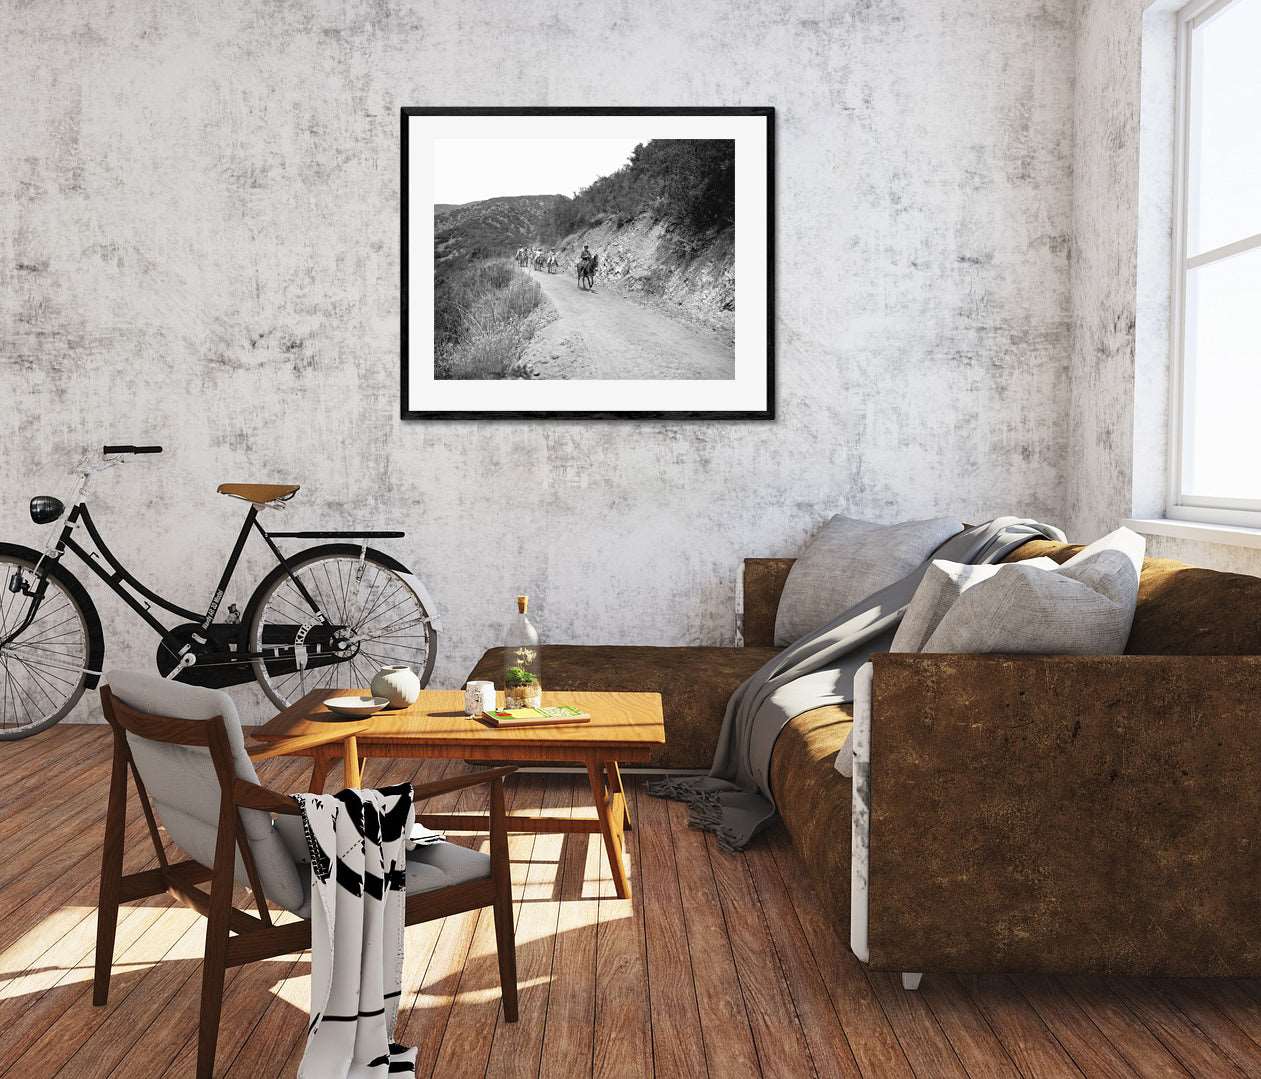 A living room with a framed print on the wall, featuring a vintage photograph of a group on horseback